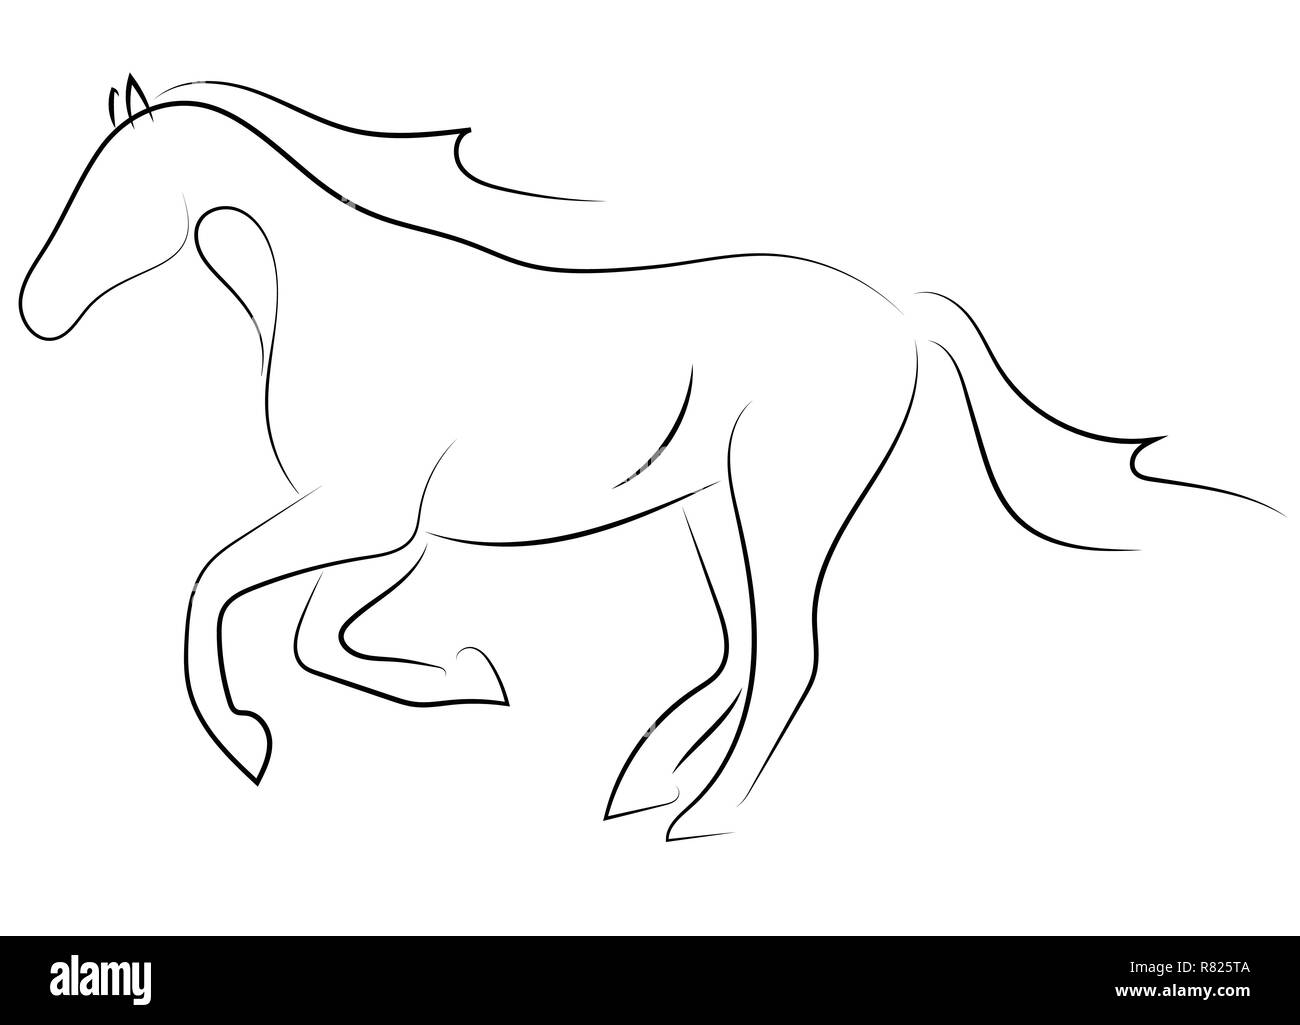 Horse sketch | Front Facing Running Horse | Pencil Drawing | how to draw  horse using pencil - YouTube